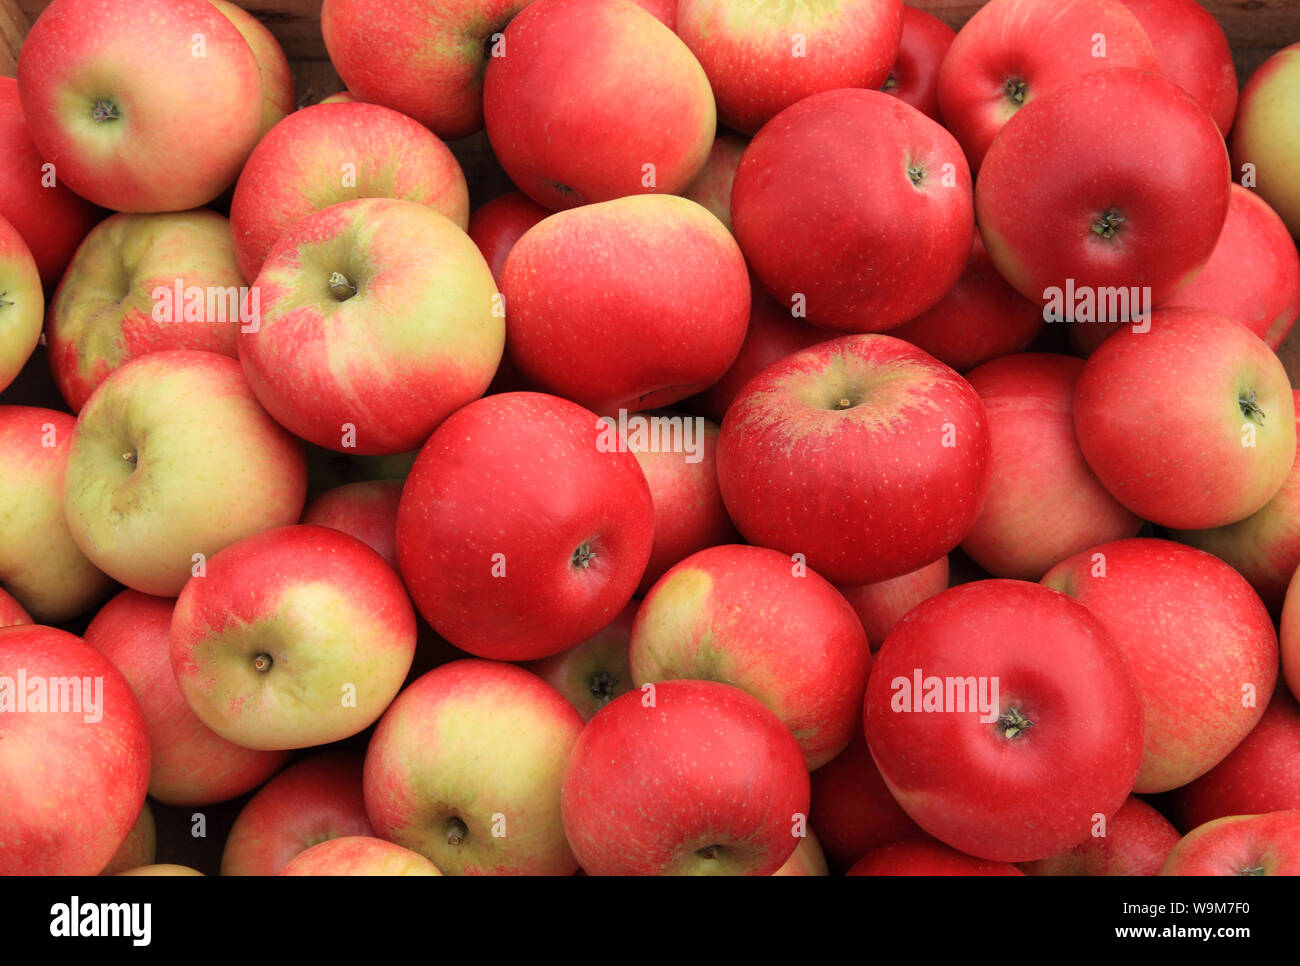 Apple 'Discovery', apples, named variety, varieties, farm shop display Stock Photo